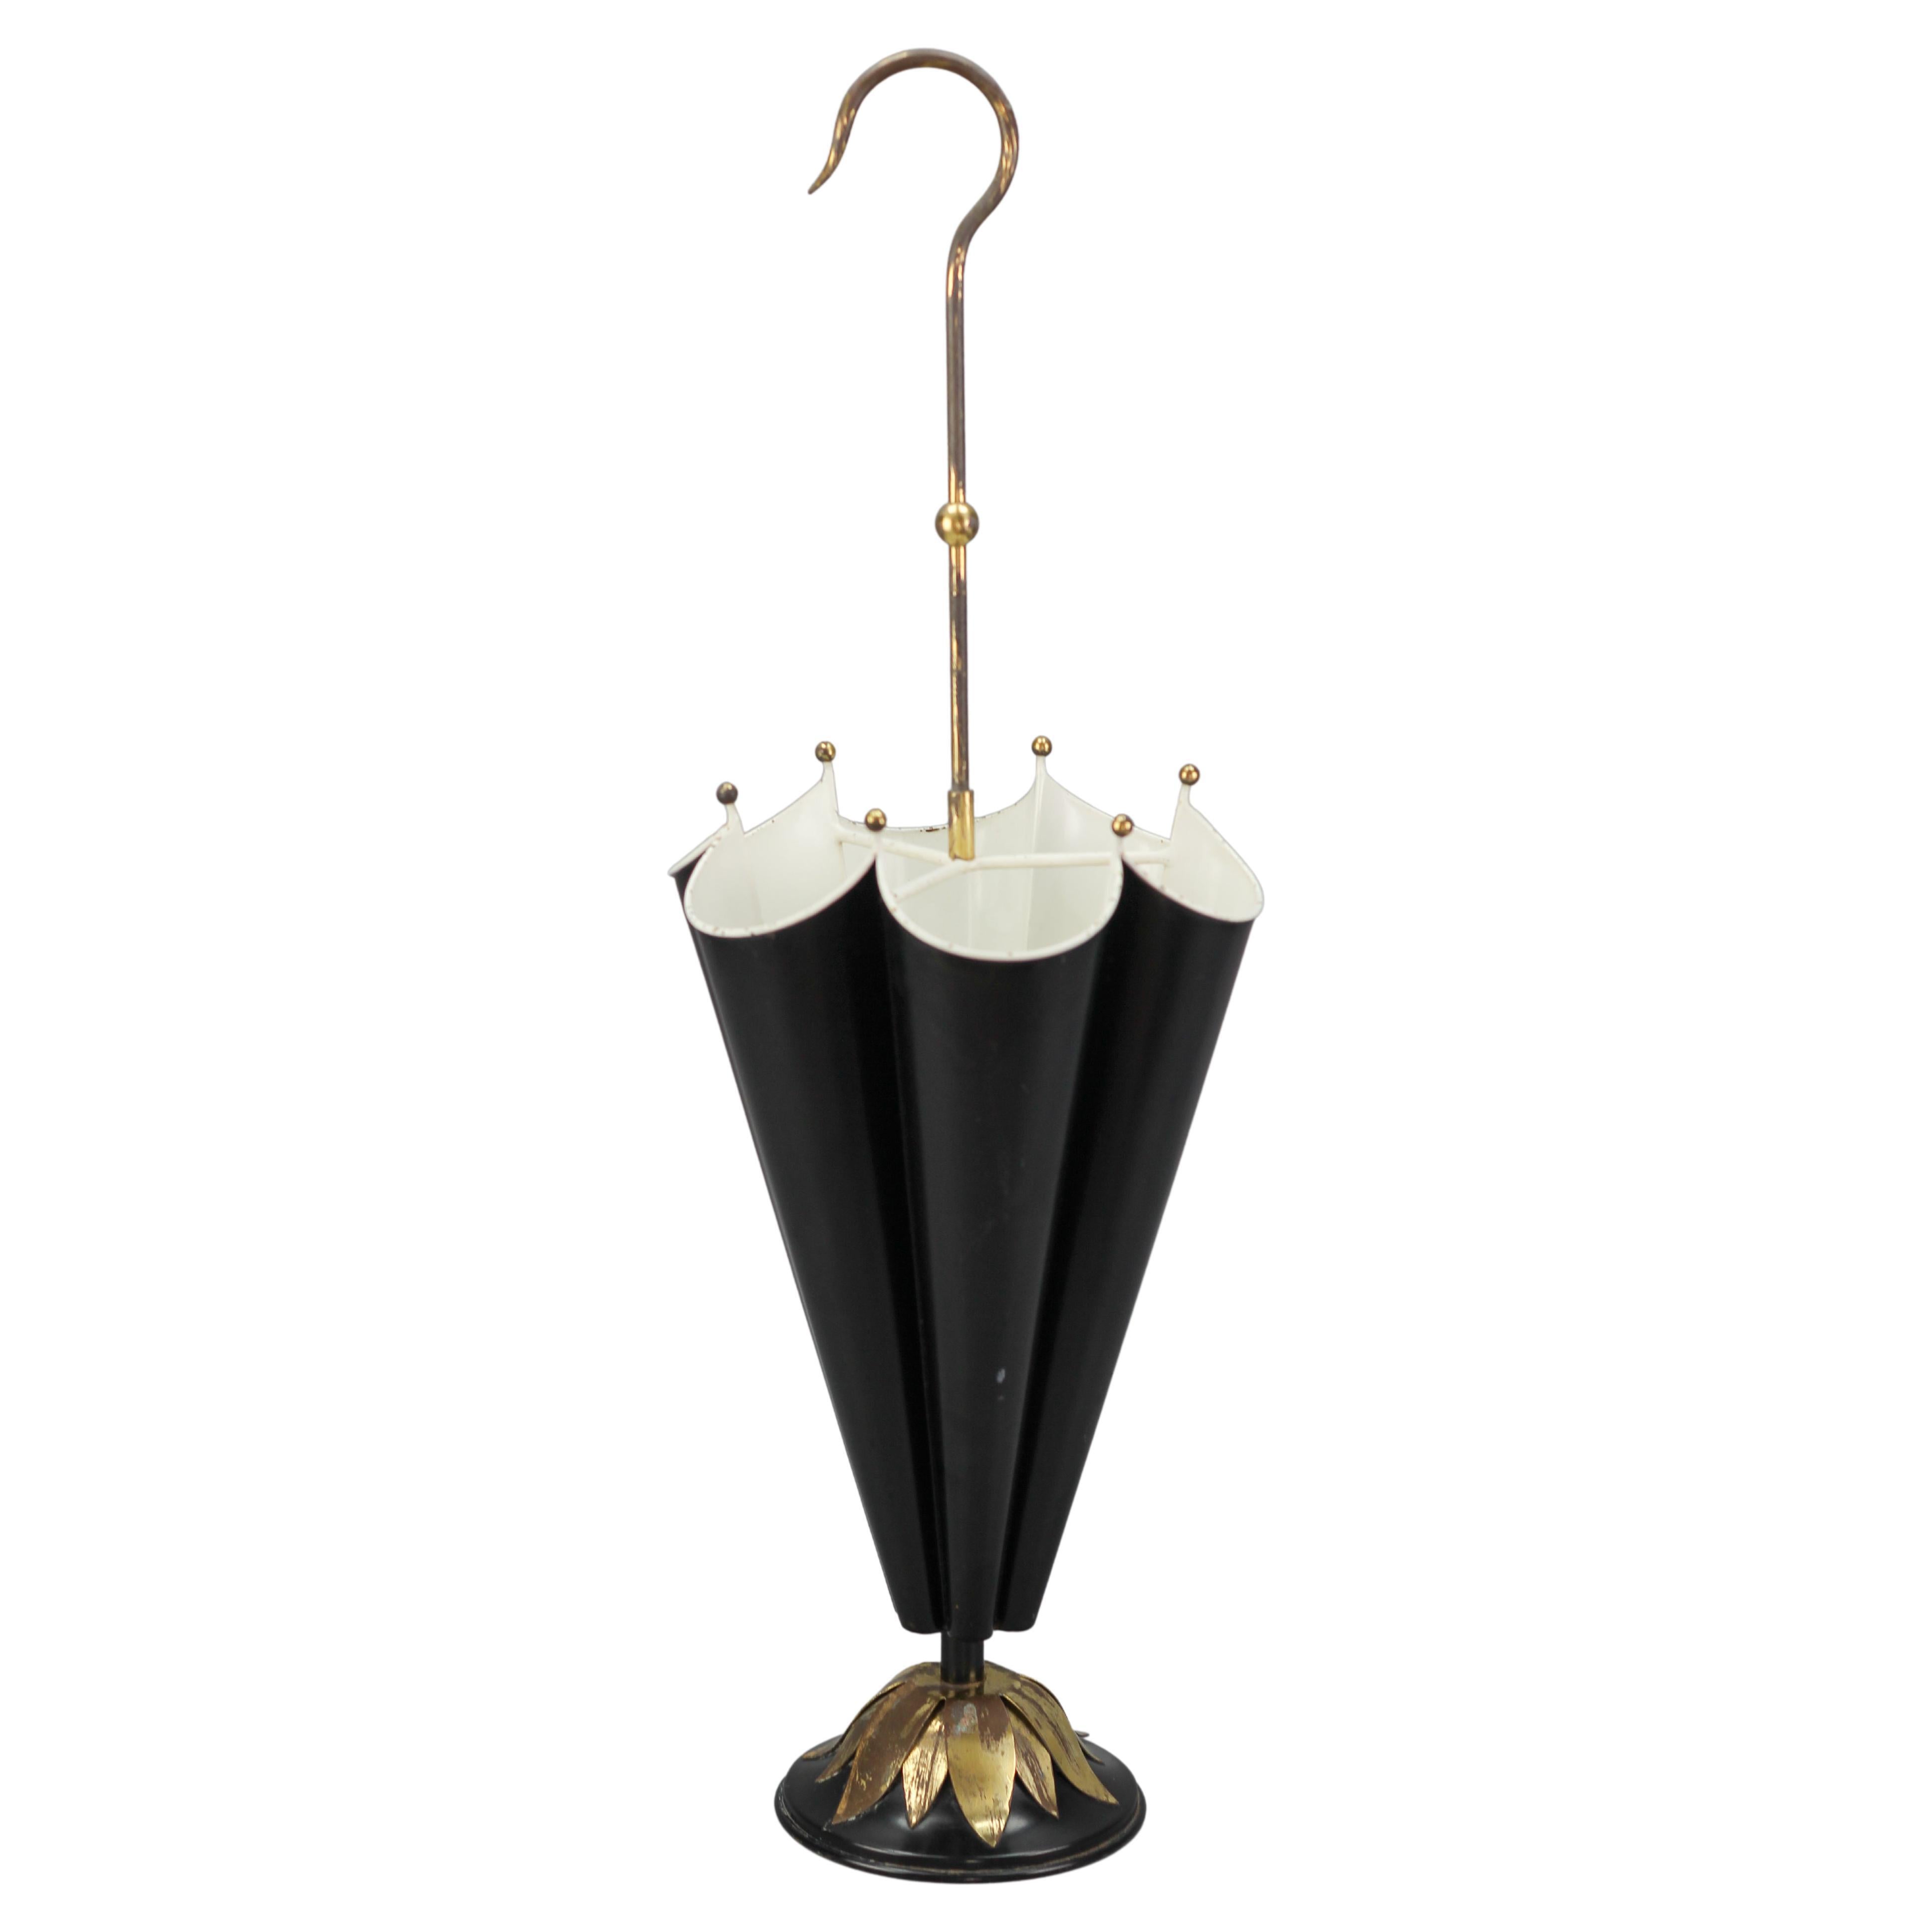 French Umbrella-Shaped Black and White Metal and Brass Umbrella Stand For Sale